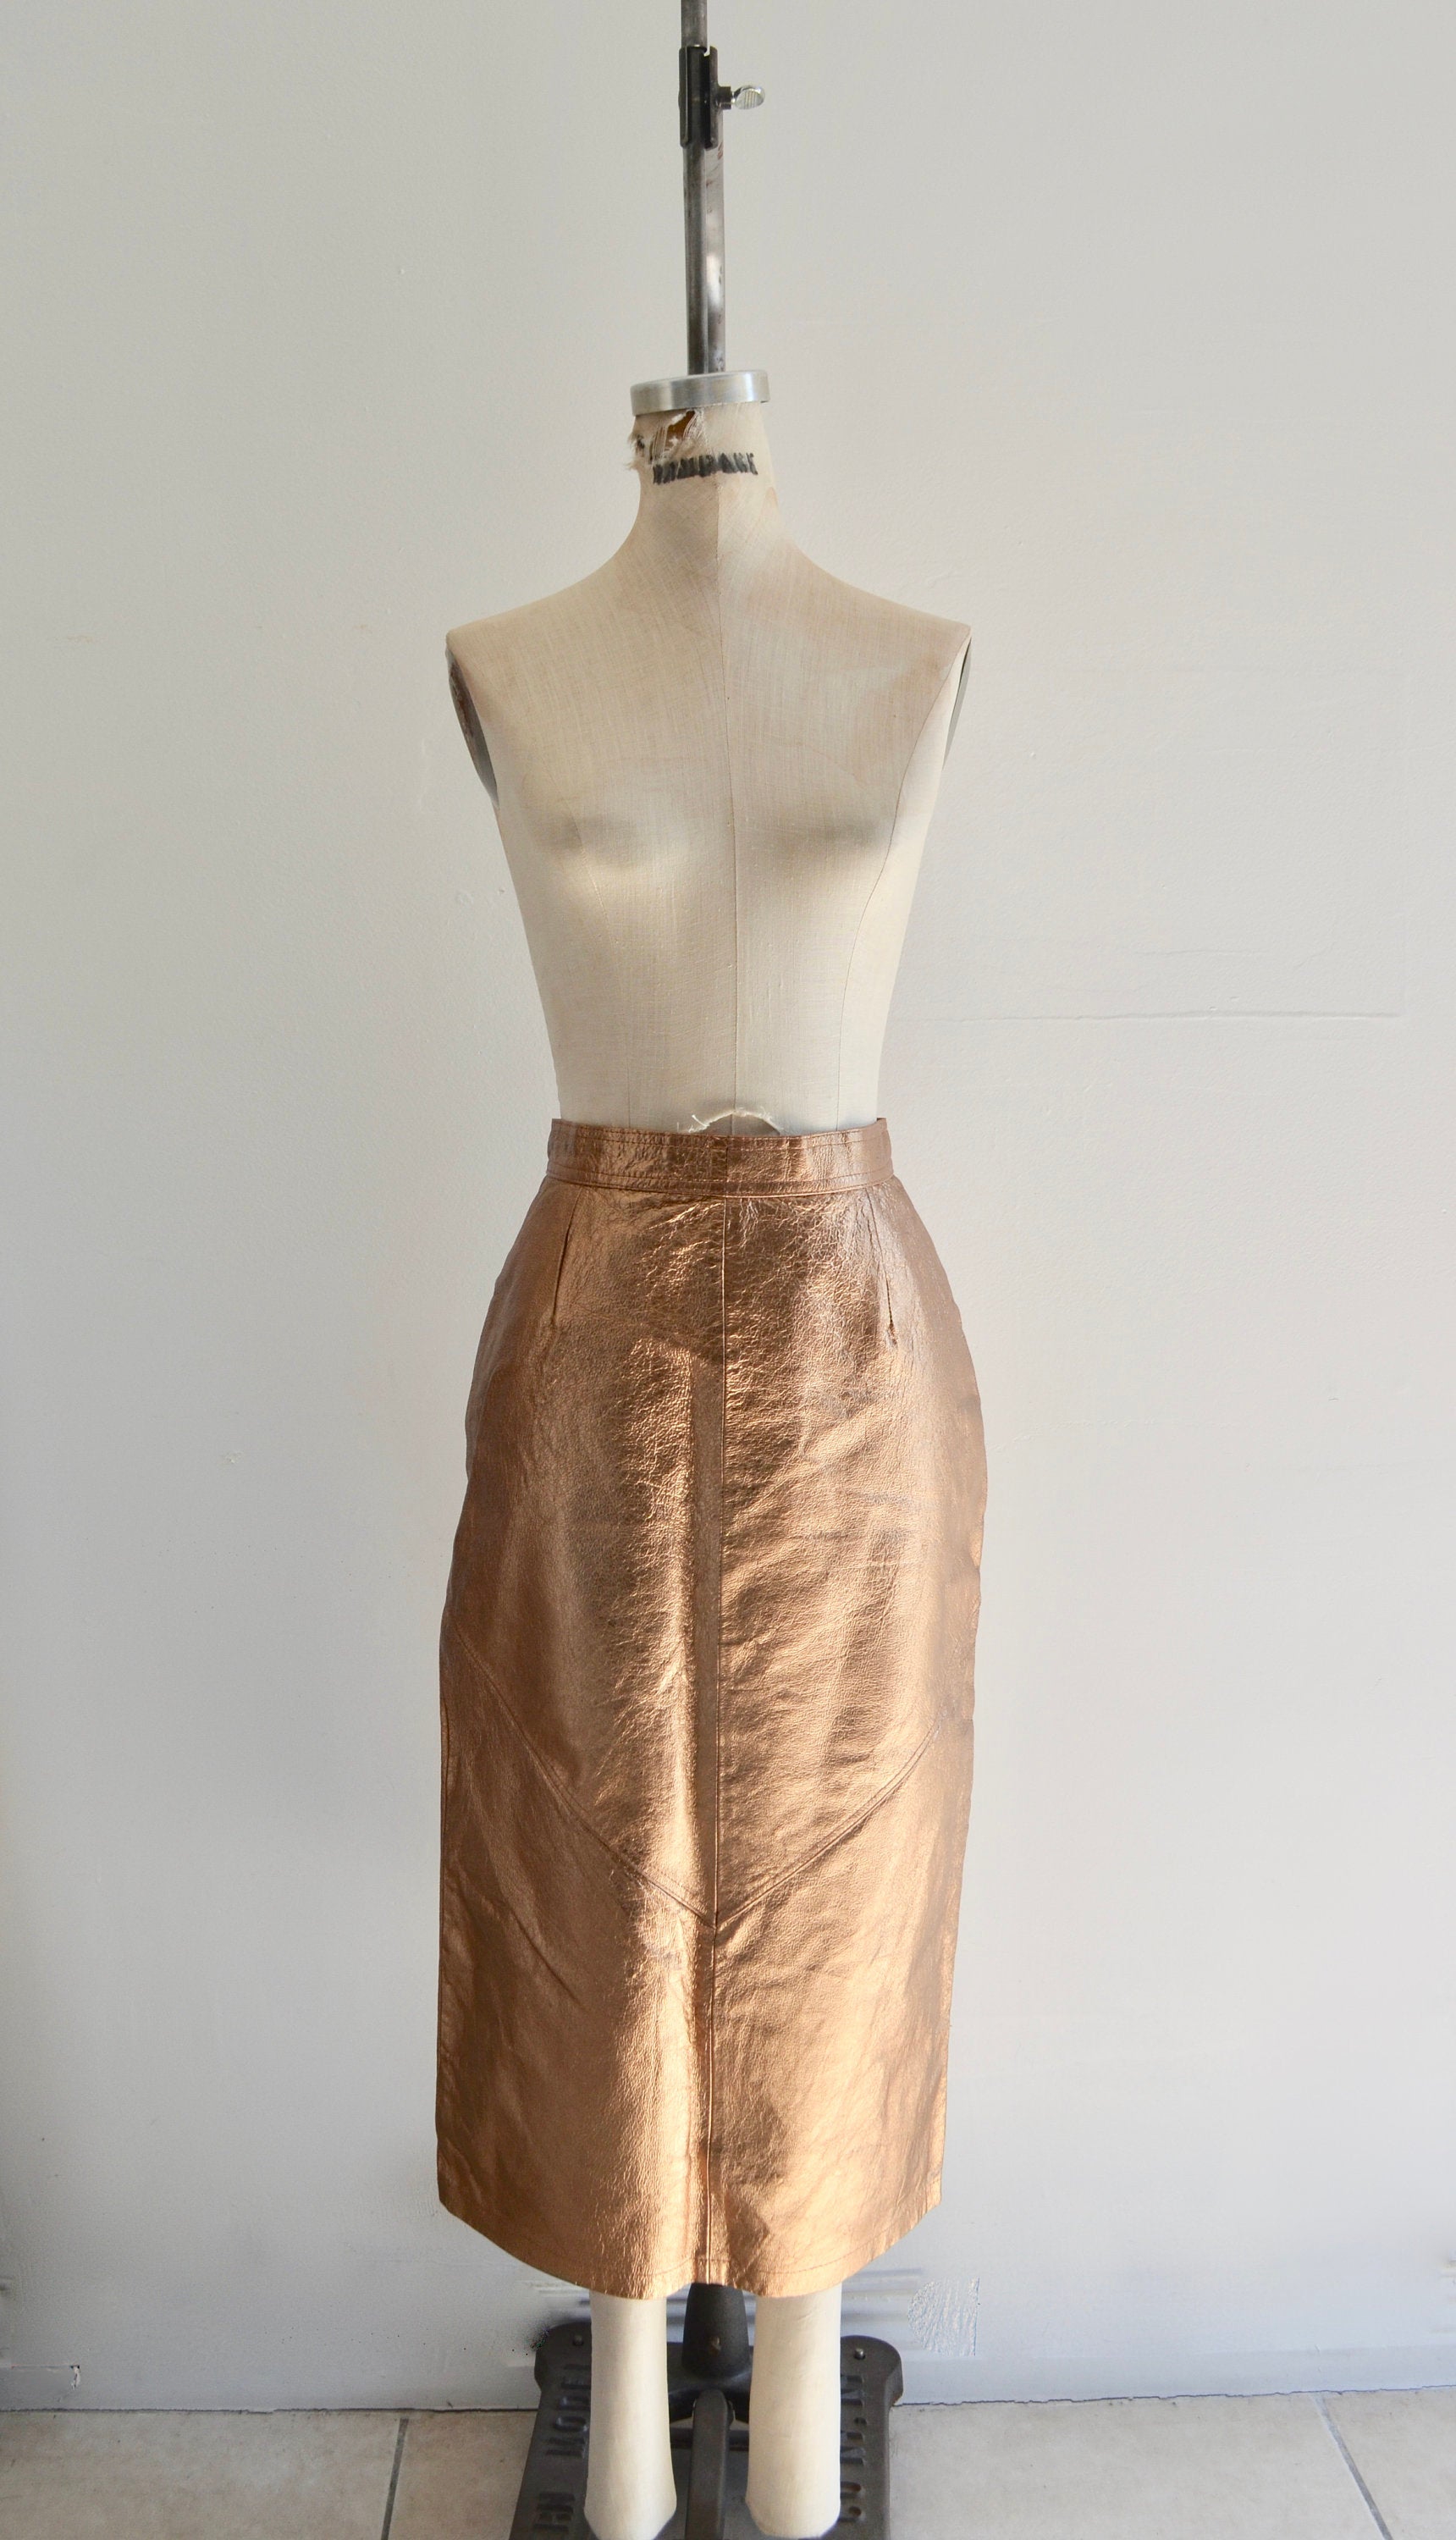 1980S Pia Rucci Gold Crackled Leather Pencil Long Skirt Lined Straight Knee Length